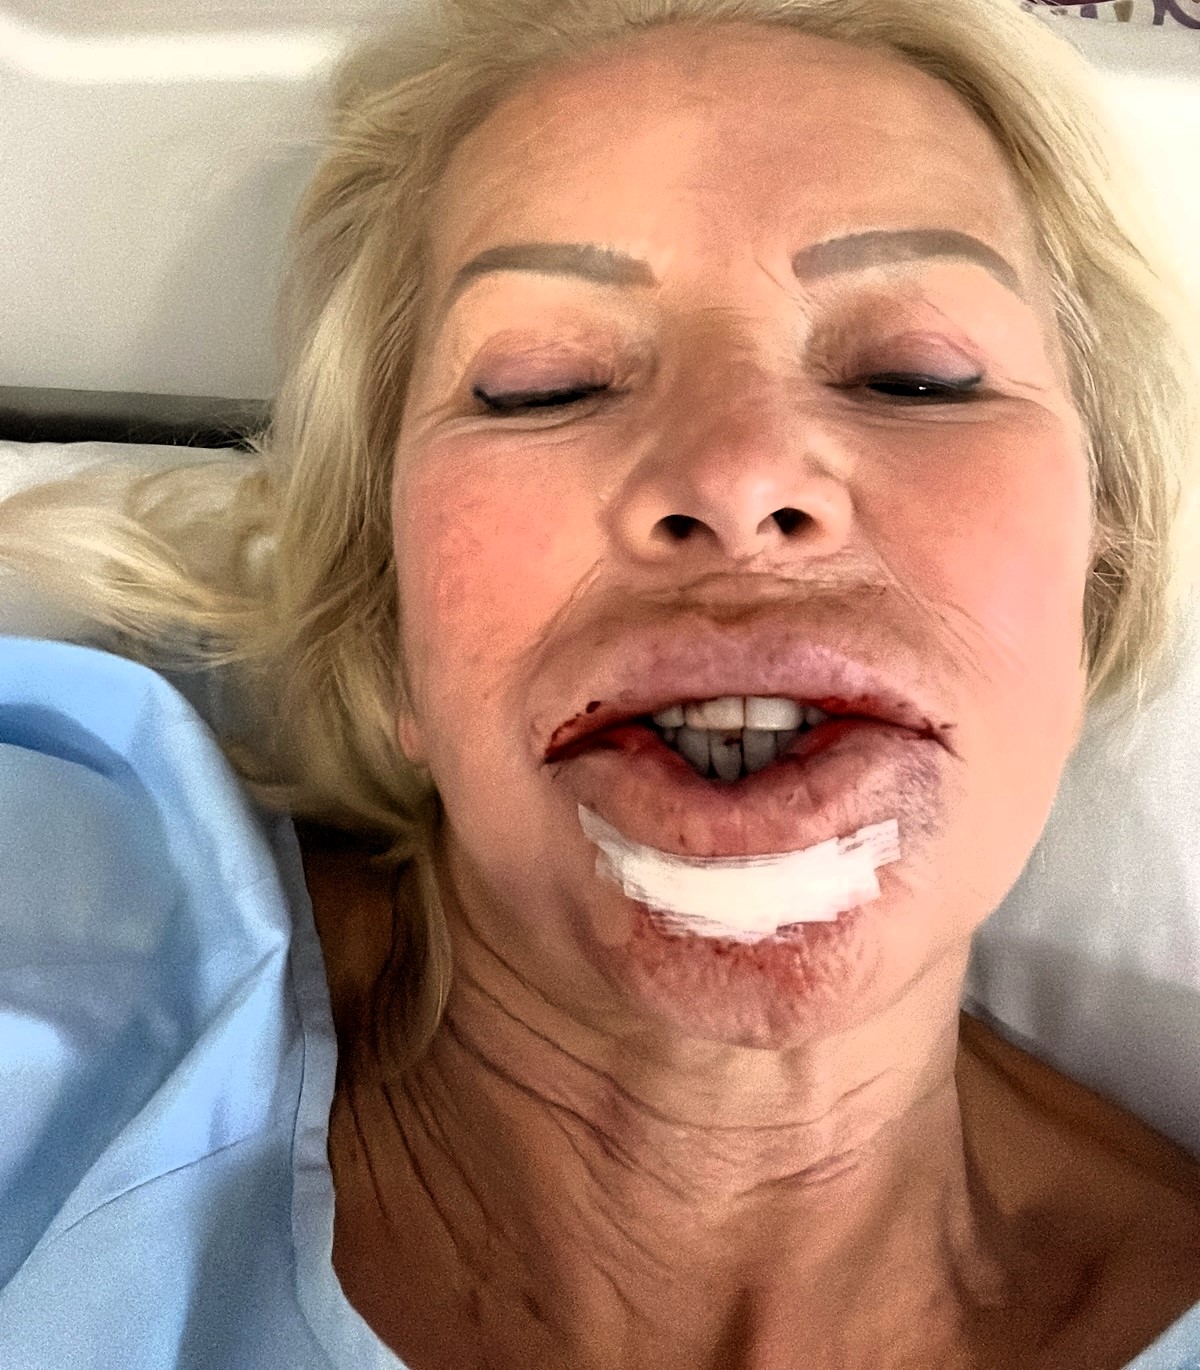 Woman's skin cancer ordeal after lip filler leads to tongue reconstruction; now, she raises awareness for skin cancer and lip filler risks